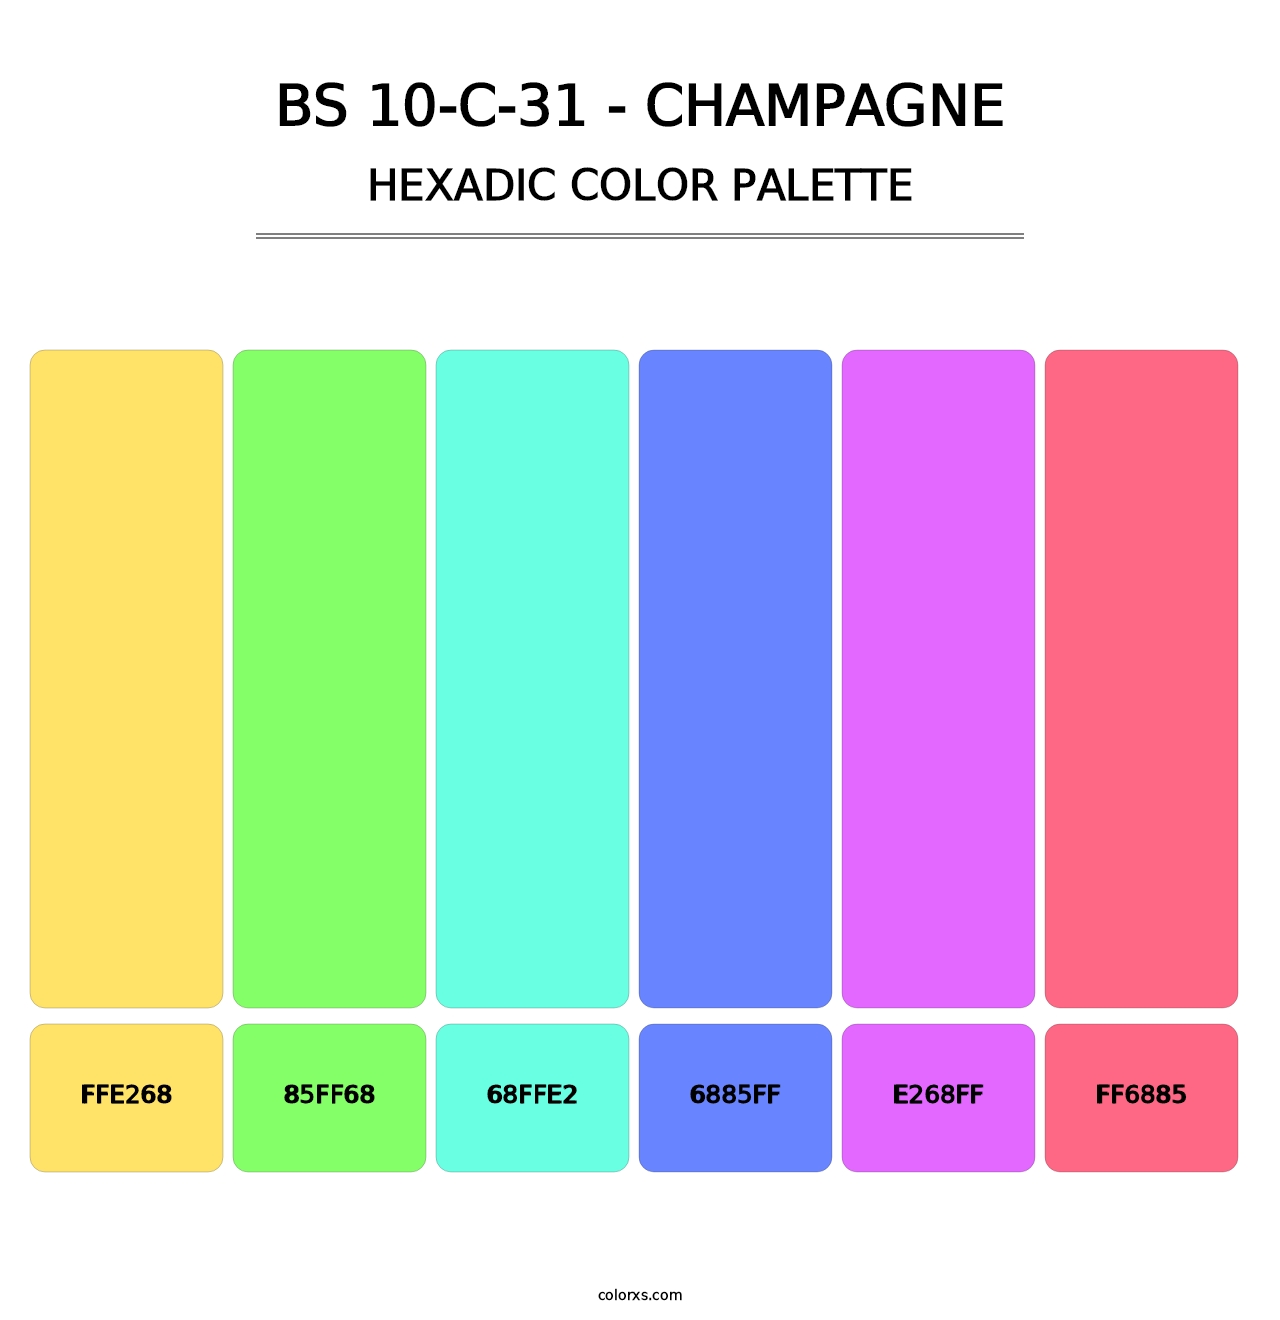 BS 10-C-31 - Champagne - Hexadic Color Palette